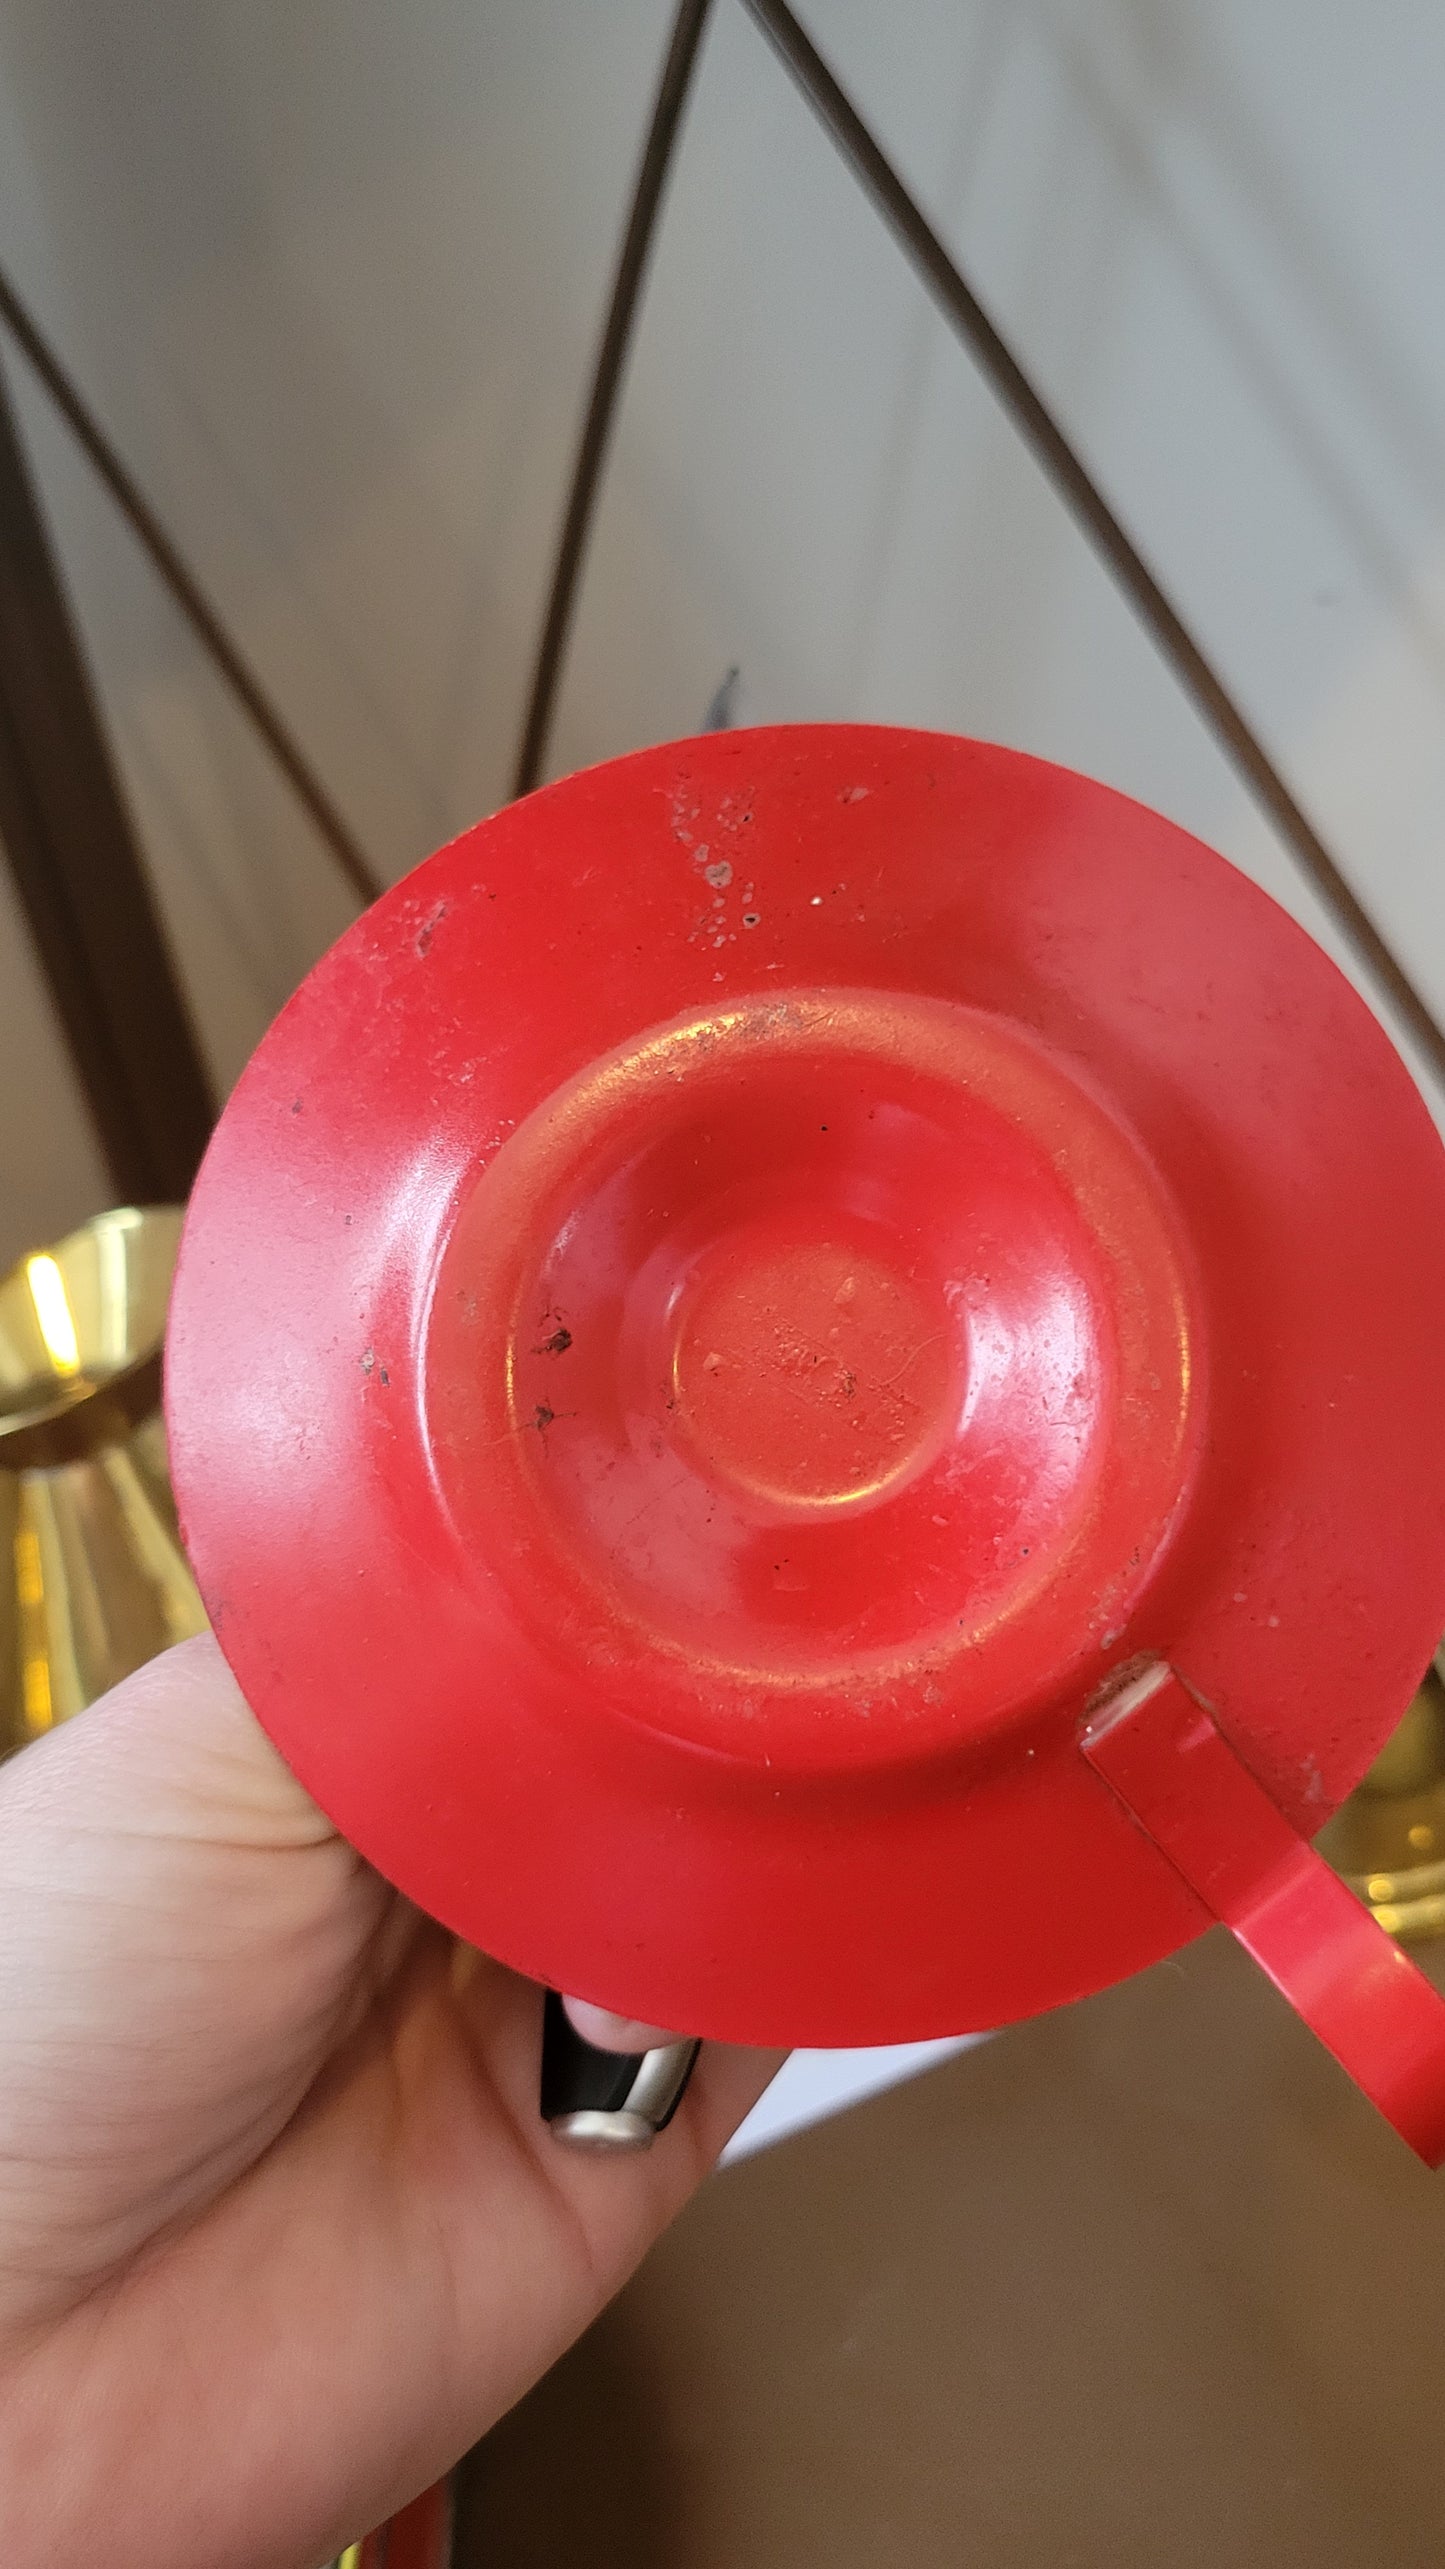 Red Metal Candle Holders